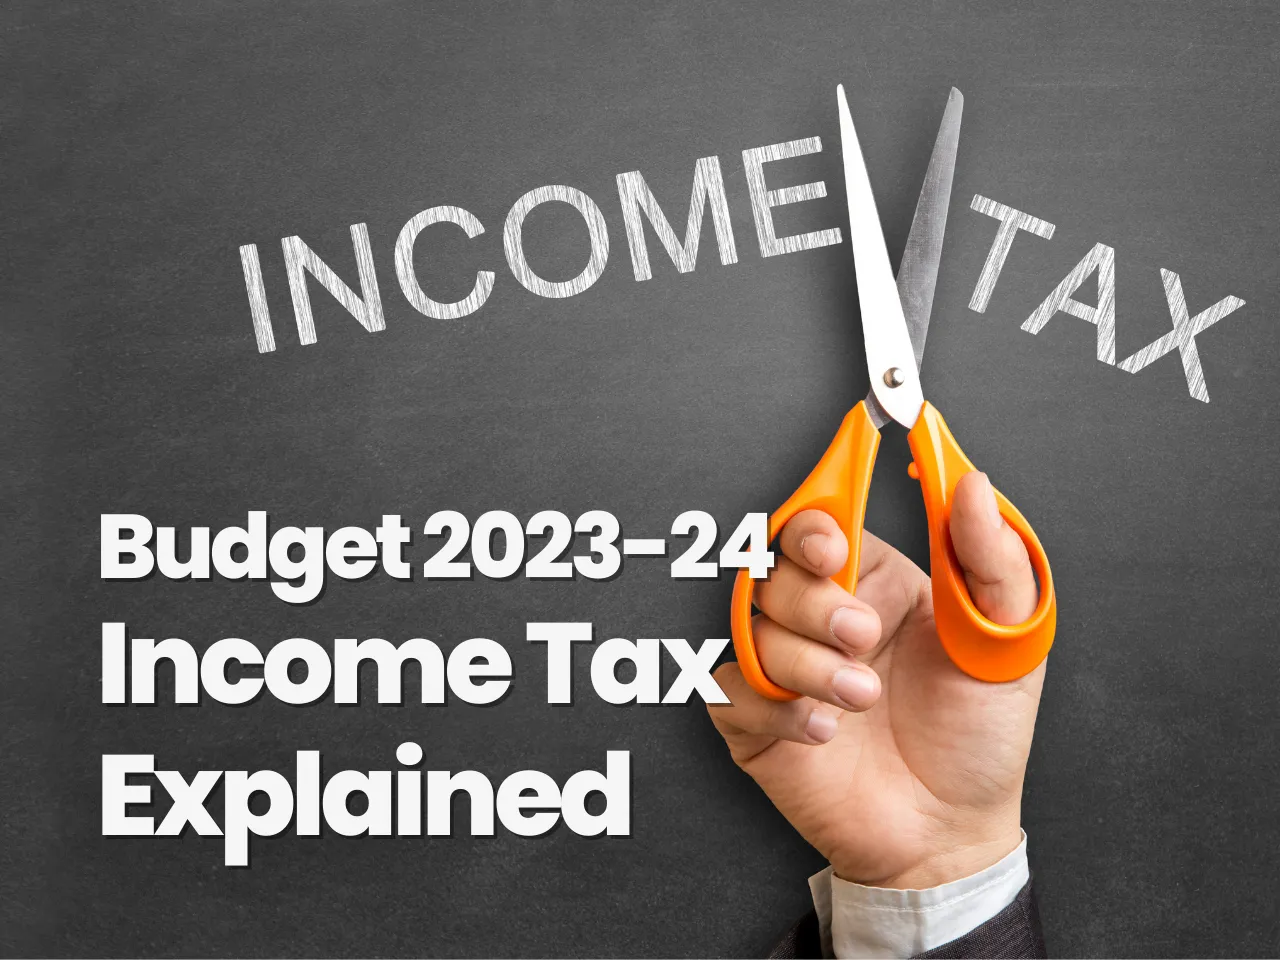 How to save Income Tax in FY 2023-24